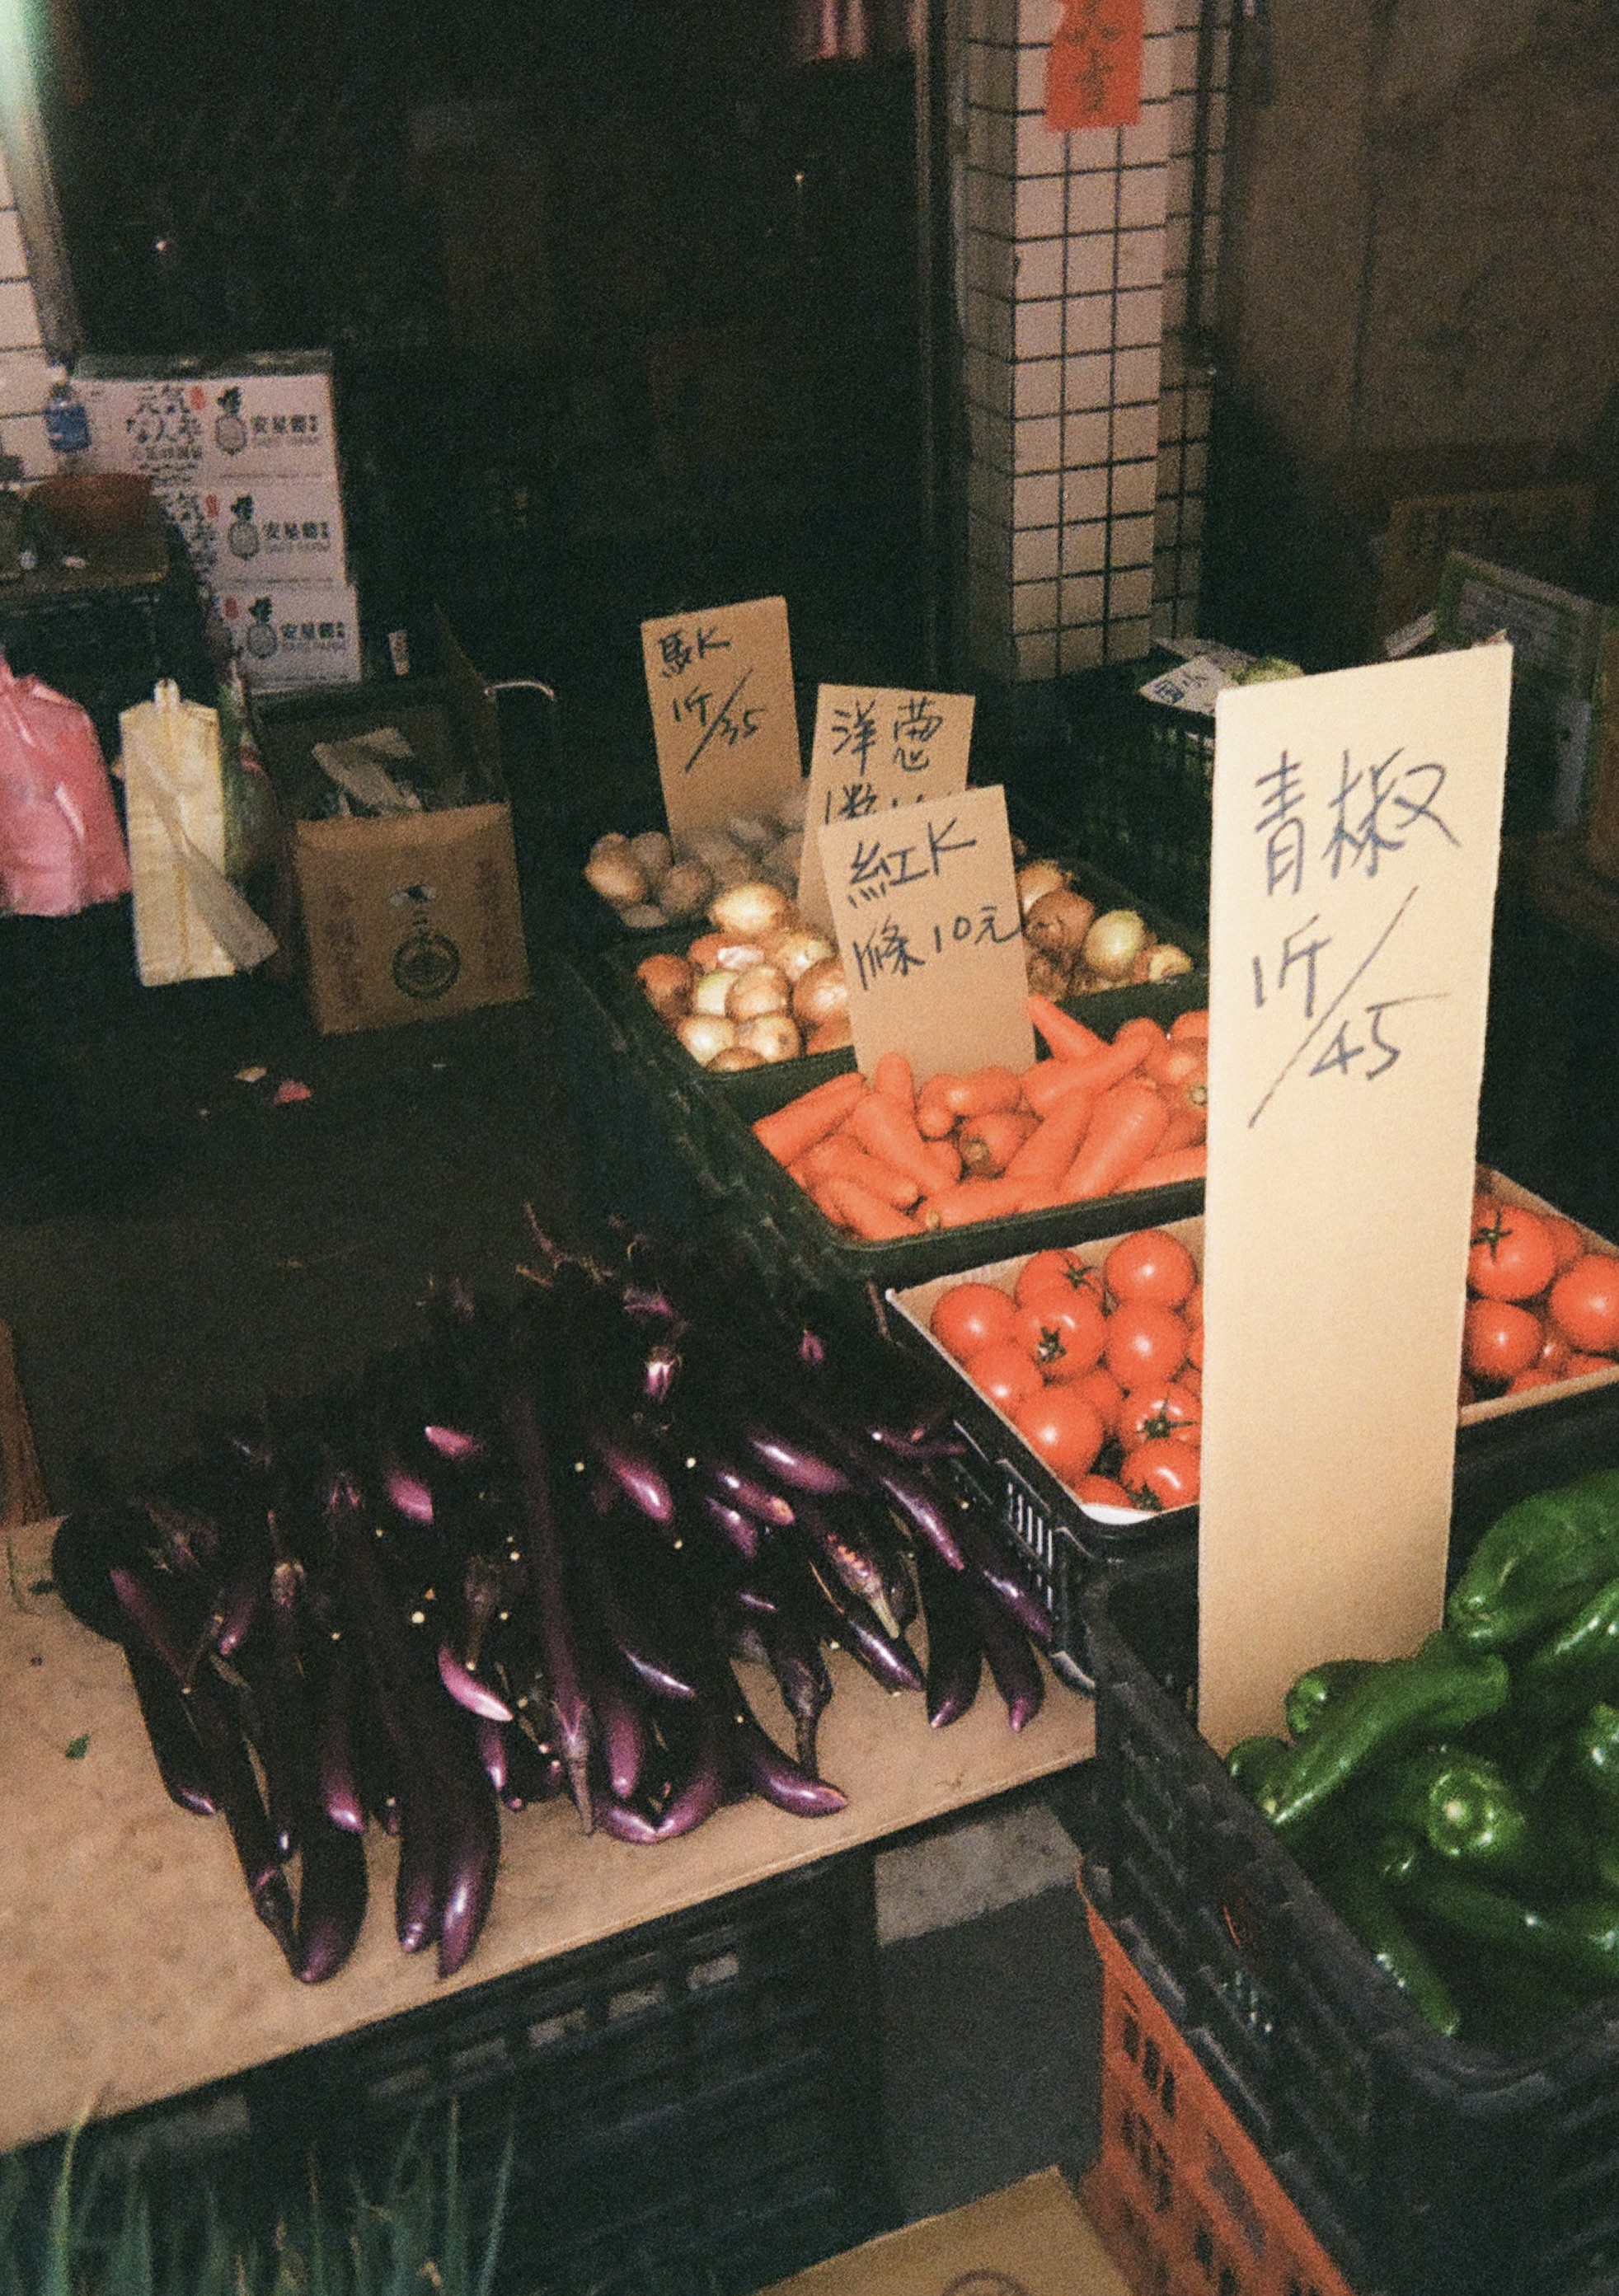 Eggplants, tomatoes, carrots, onions in a market